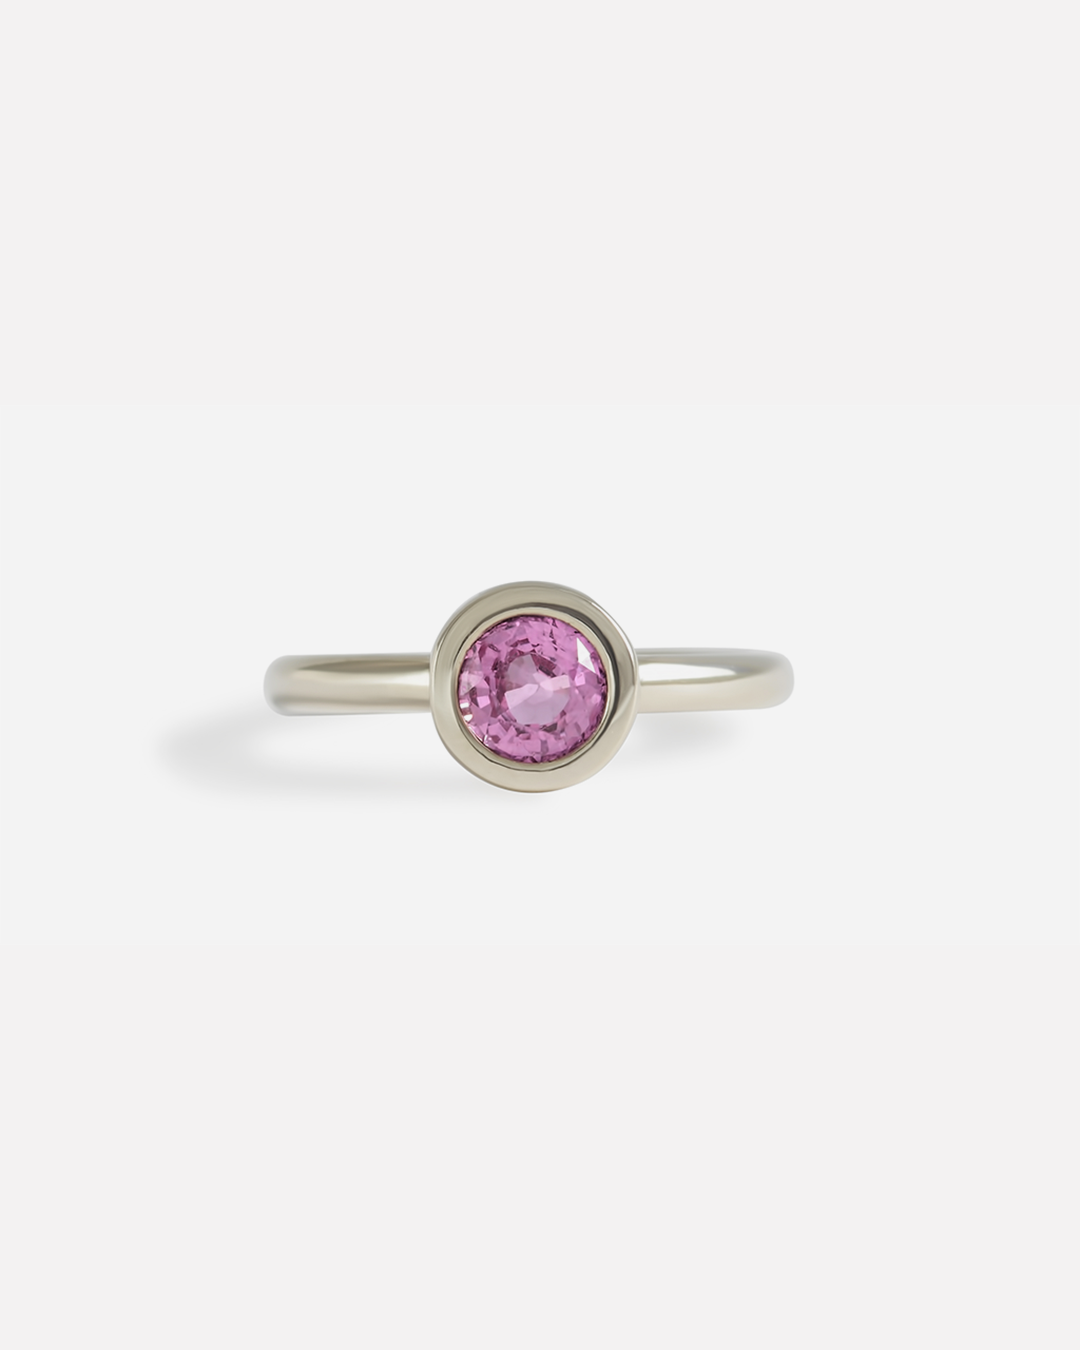 Split Set / Pink Sapphire By fitzgerald jewelry in Engagement Rings Category